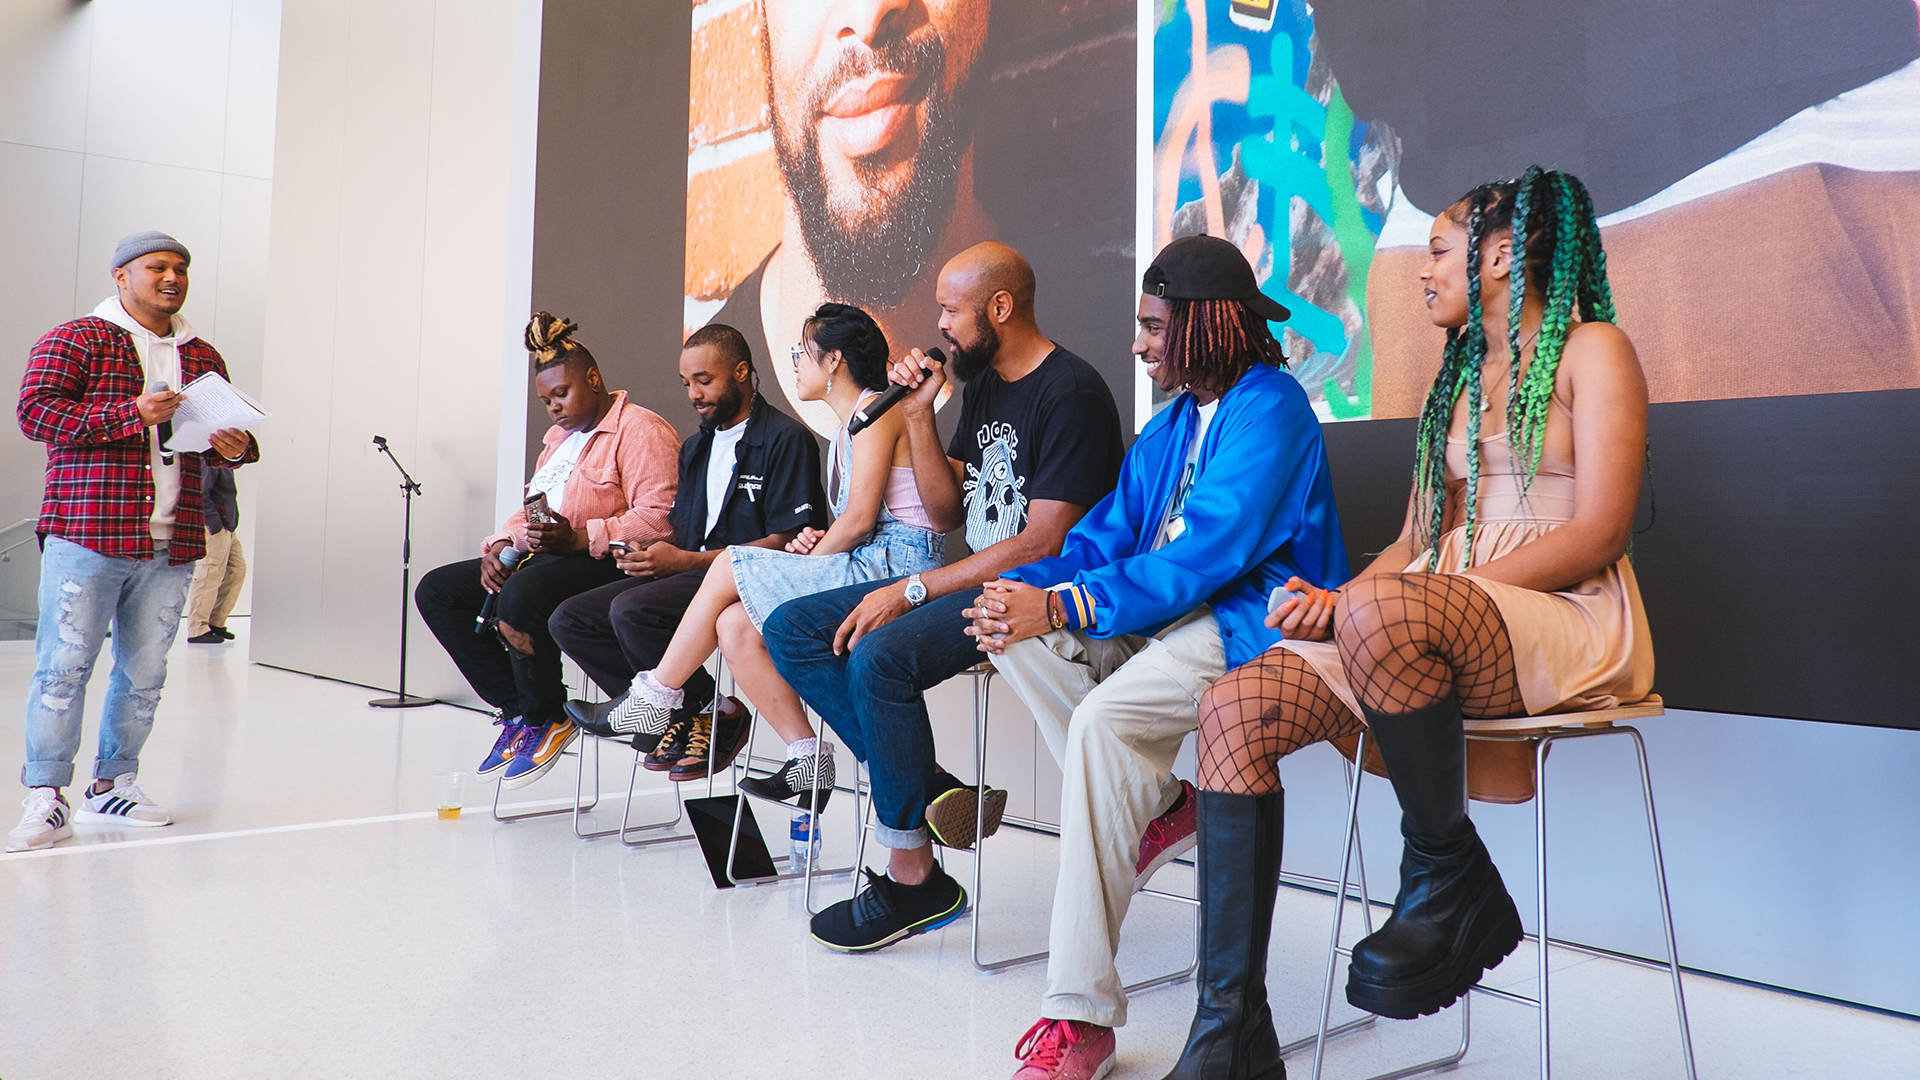 Creative collective Le Vanguard performed and did a panel discussion at the Apple store in Union Square in August 2018. Kristian Contreras/YK La Familia